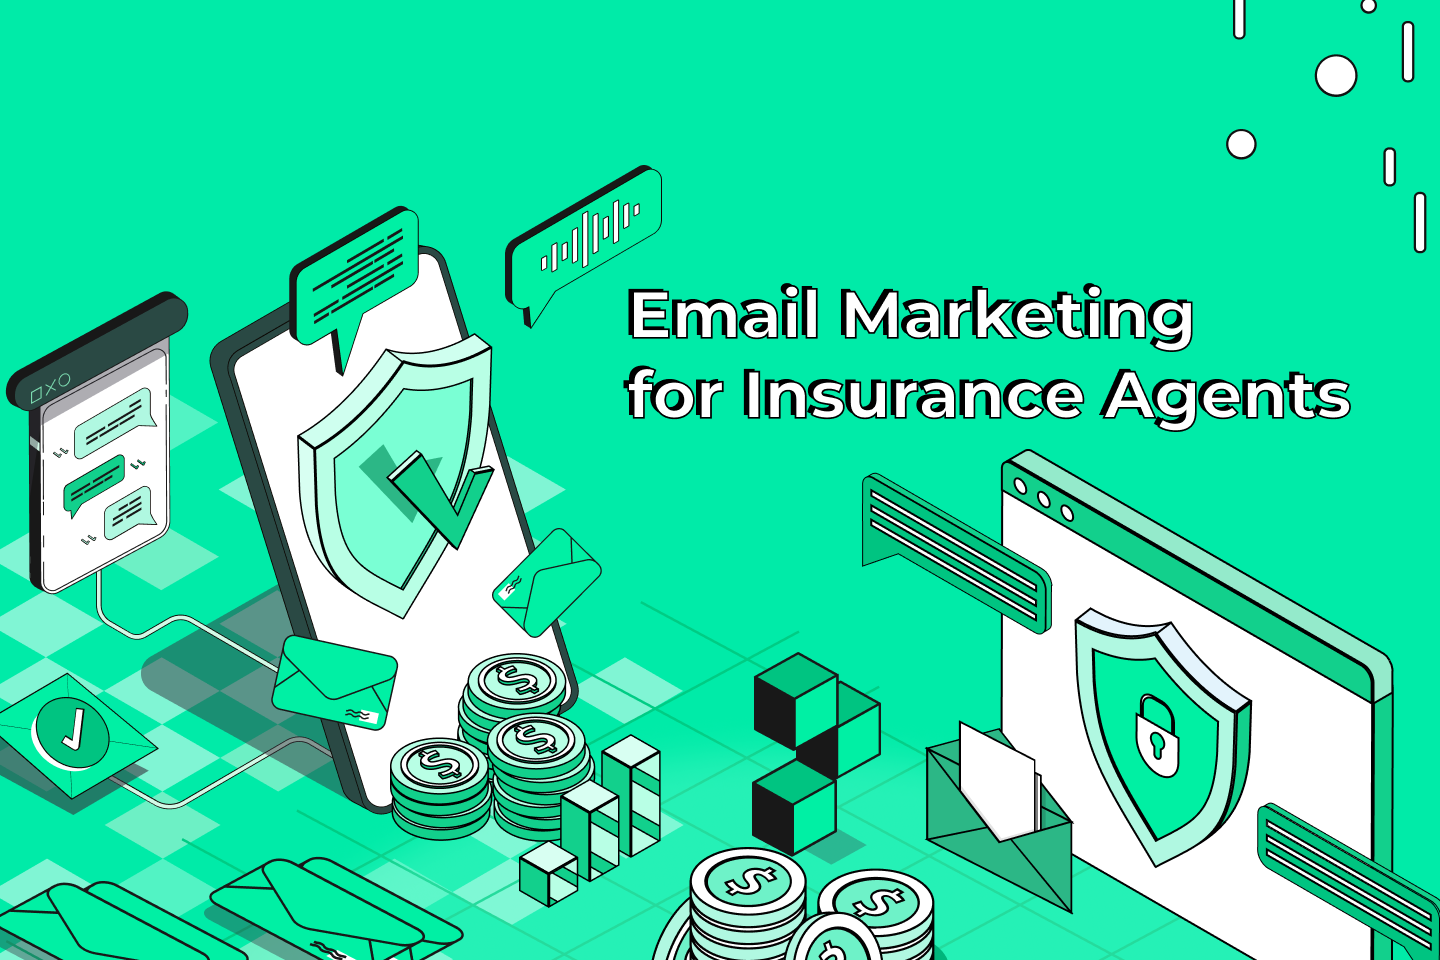 Email Marketing for Insurance Agents